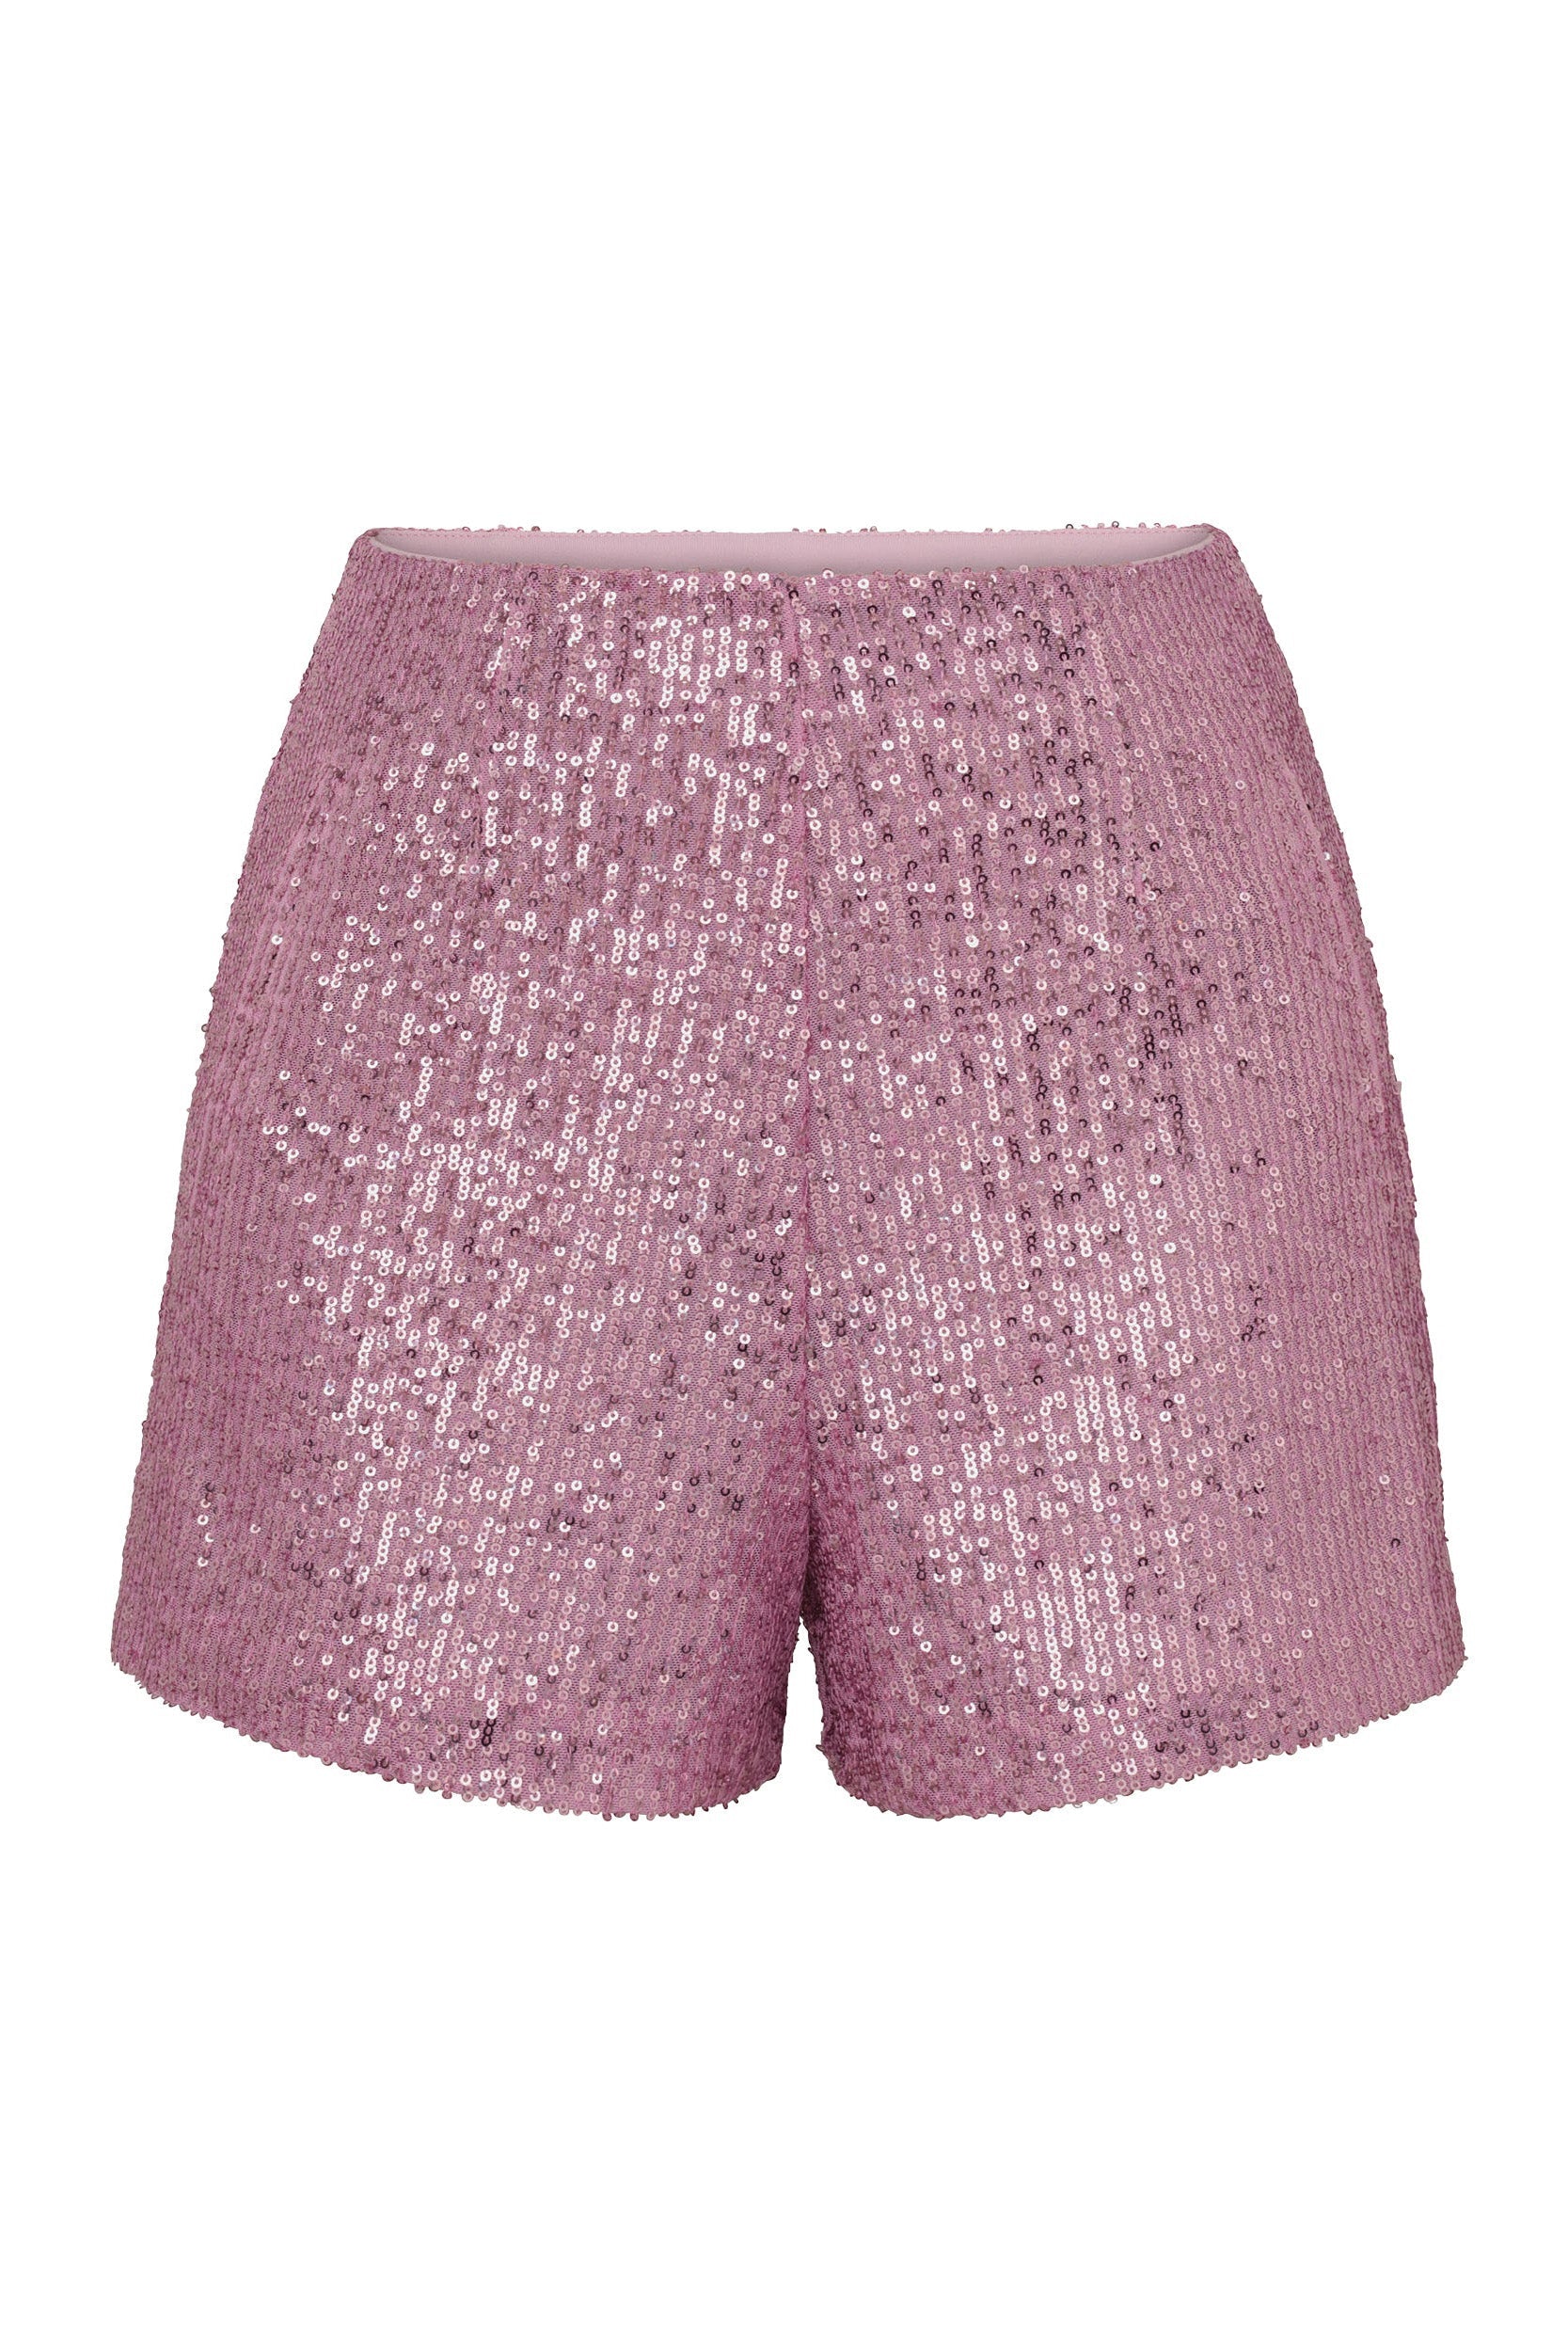 A pair of high-waisted, Sweet Pink Sequin Shorts covered in sequins, giving a shimmering and sparkly appearance. Perfect for a special event or as part of your favorite summer set, the shorts are tailored with a slightly flared leg and have a smooth waistband.